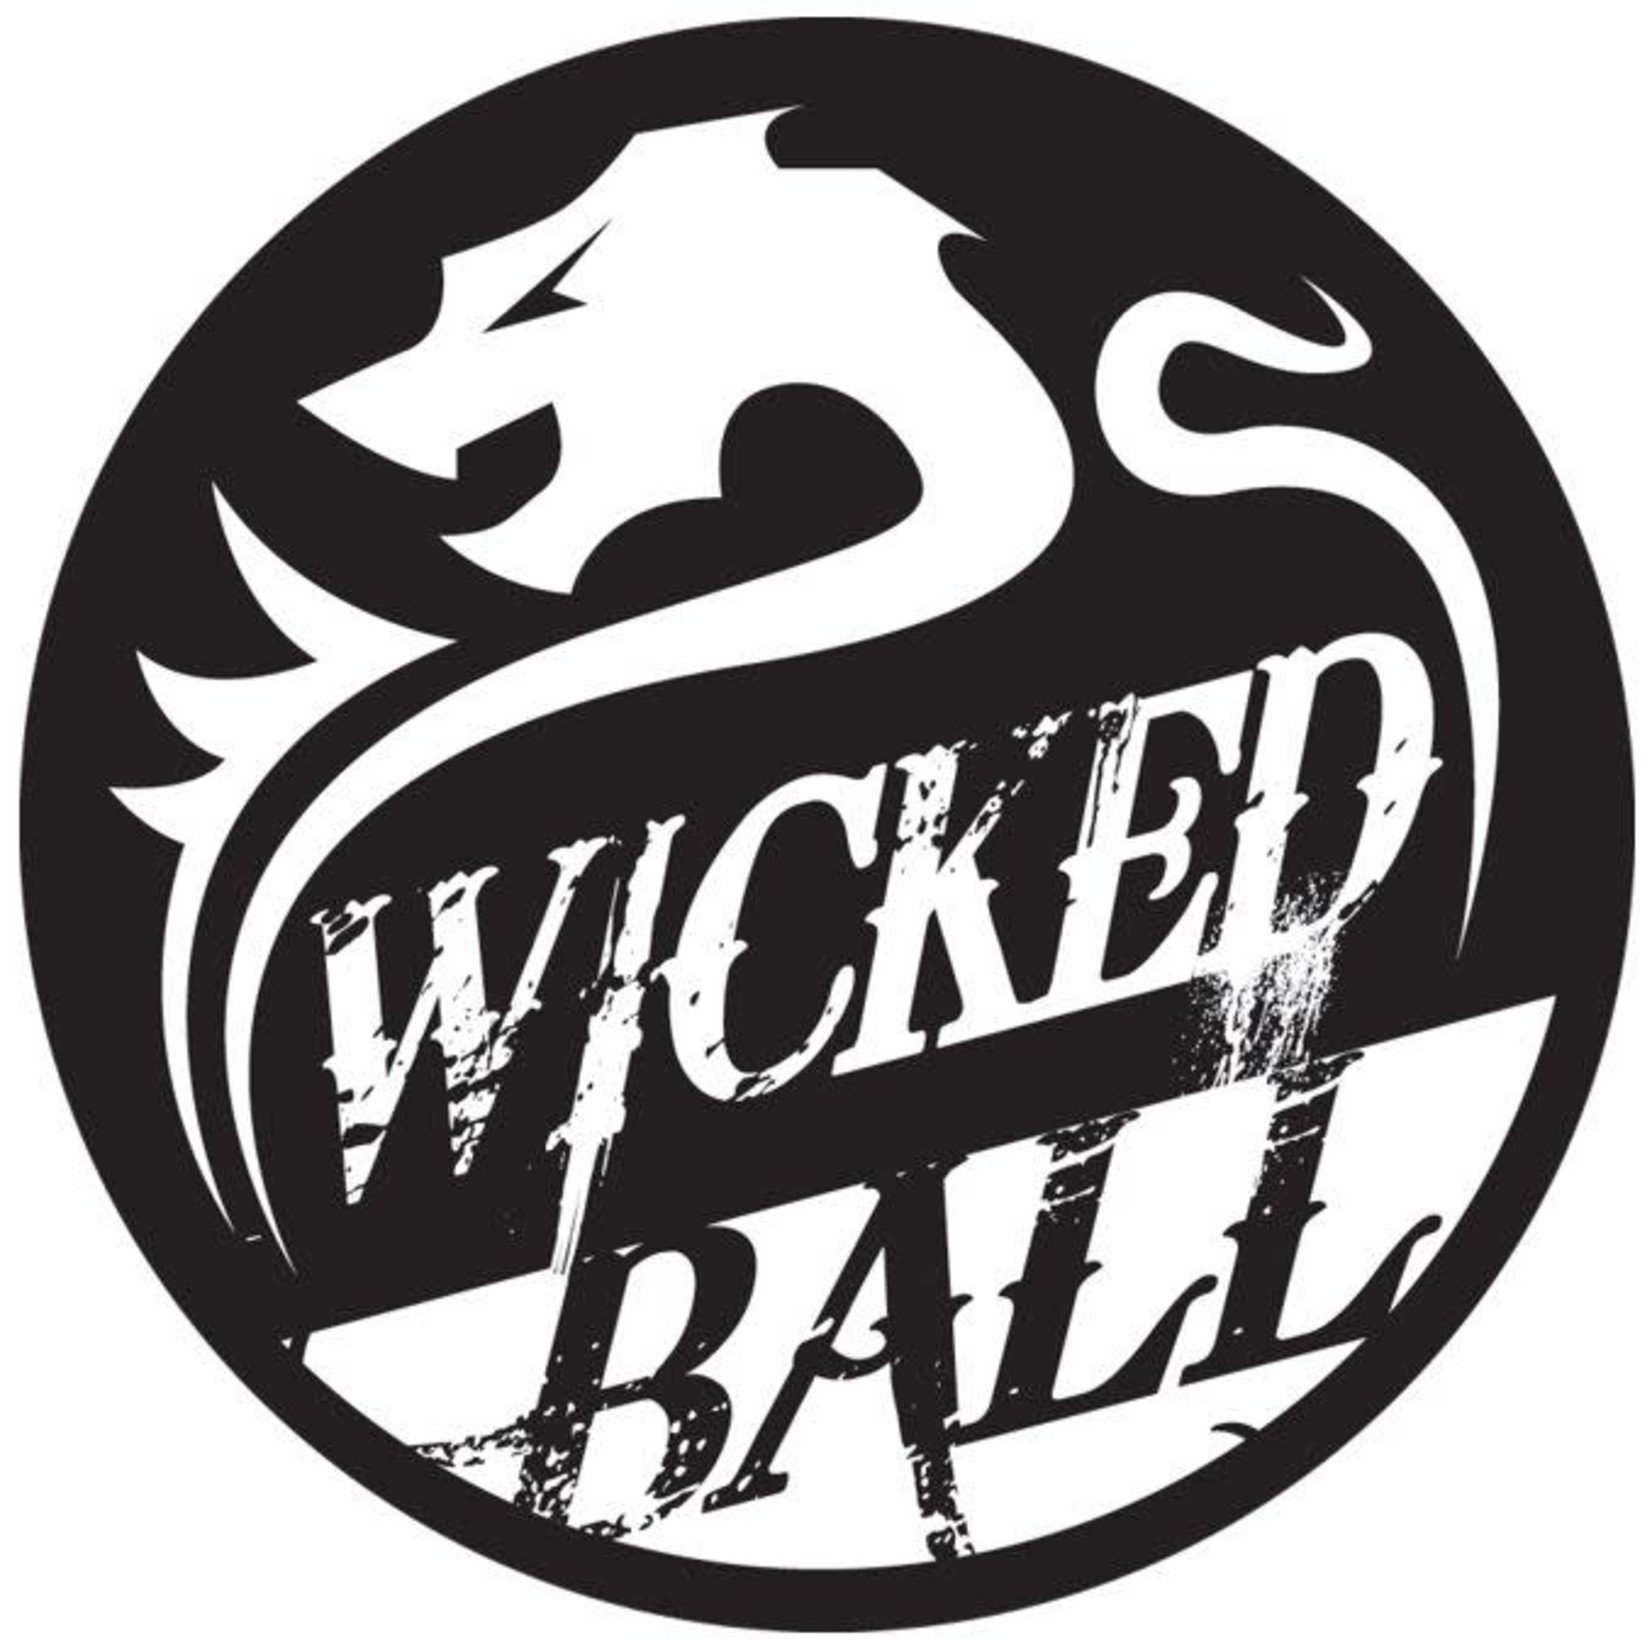 Wicked Ball-Lombard Wicked Ball-Lombard $25.00 Entertainment Certificate